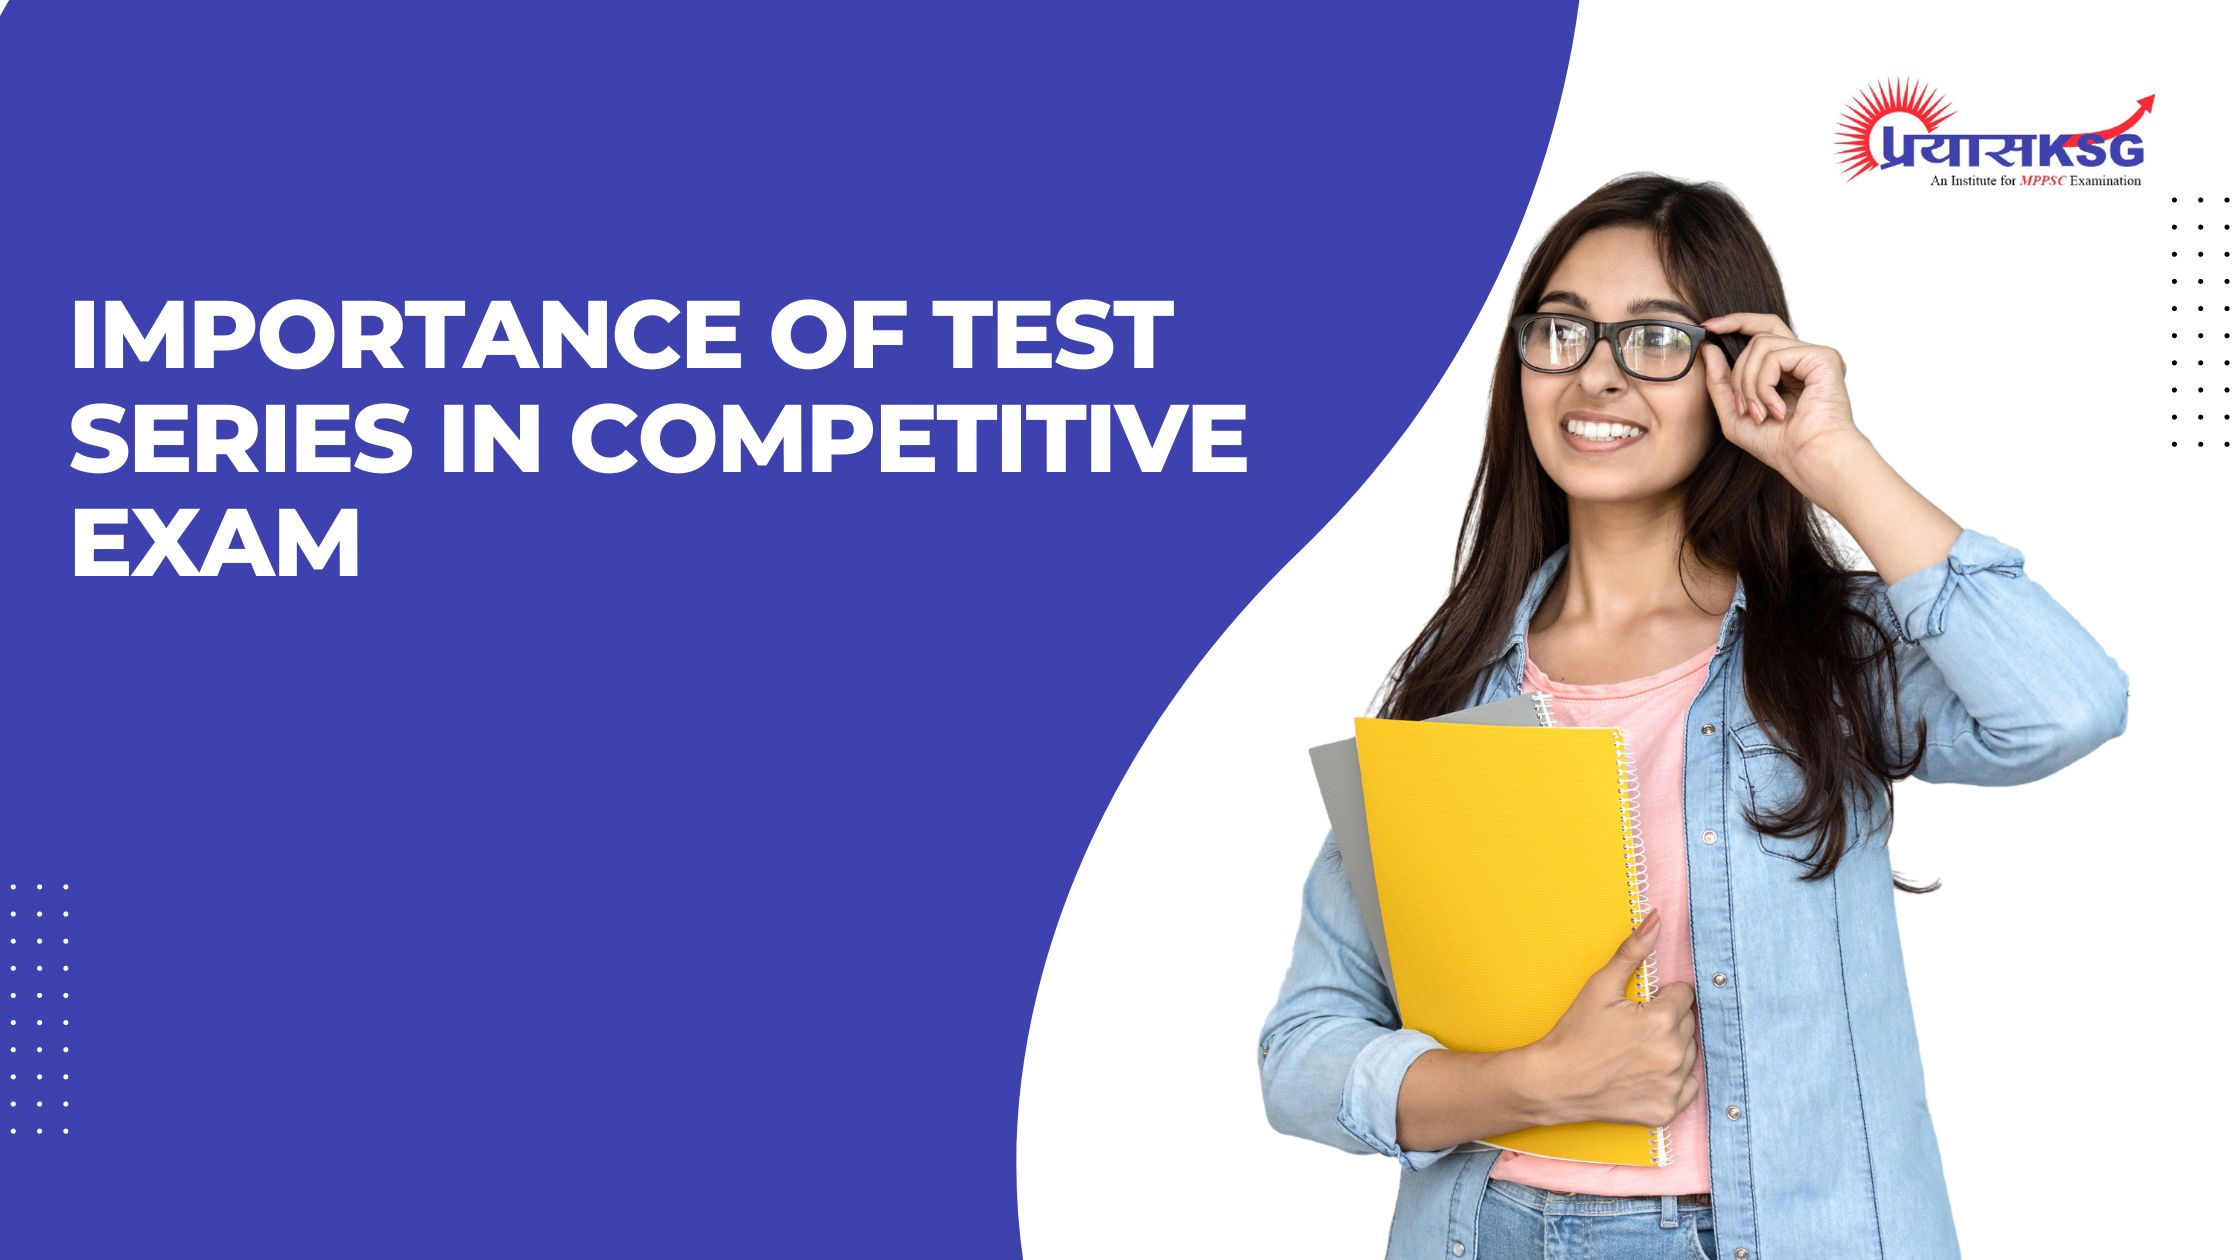 Importance of Test Series in Competitive exam